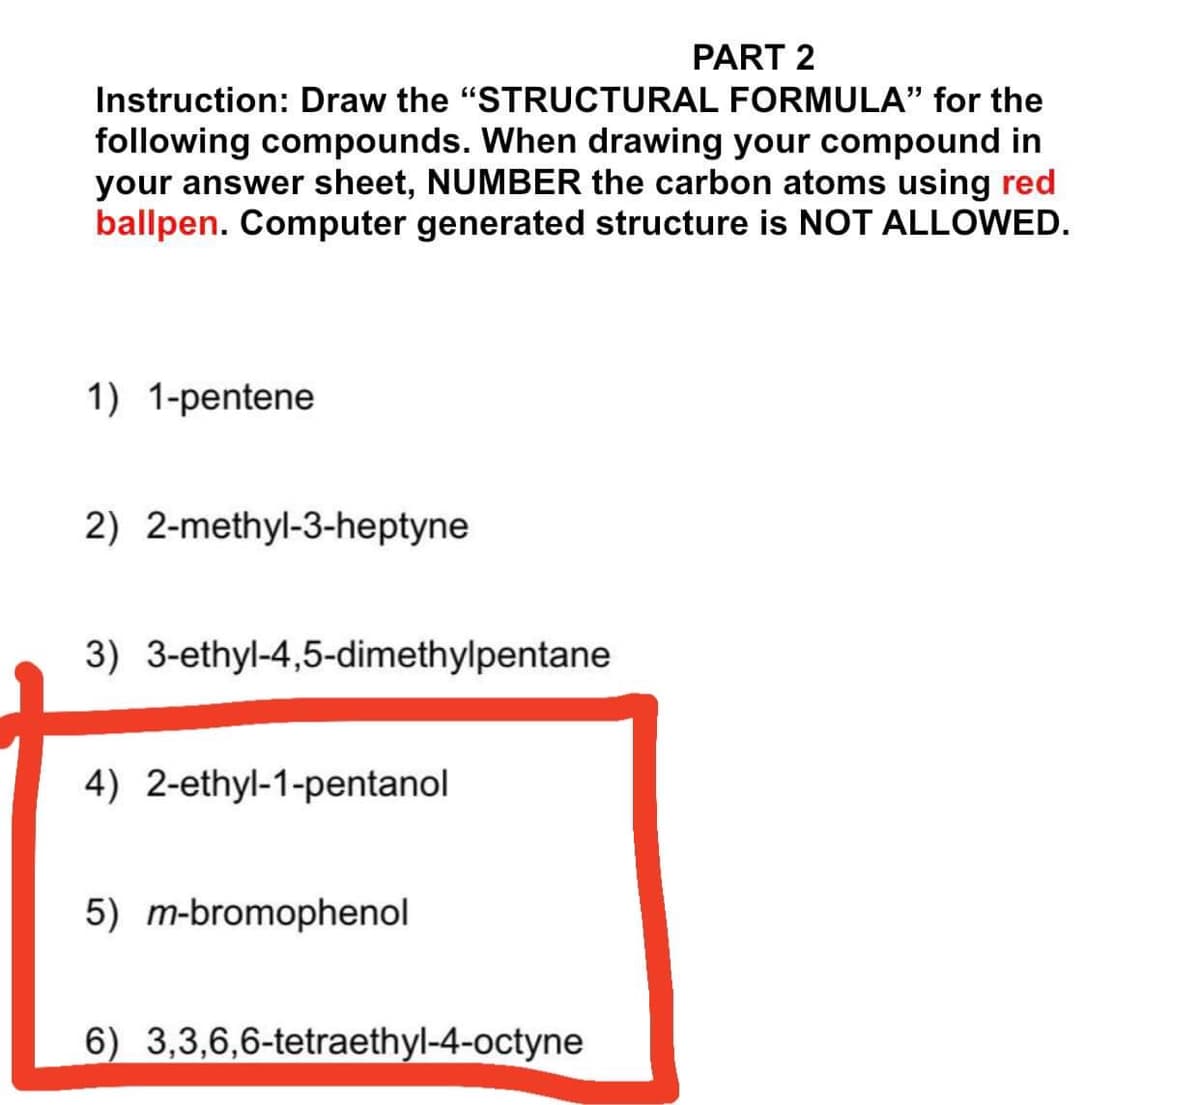 PART 2
Instruction: Draw the "STRUCTURAL FORMULA" for the
following compounds. When drawing your compound in
your answer sheet, NUMBER the carbon atoms using red
ballpen. Computer generated structure is NOT ALLOWED.
1) 1-pentene
2) 2-methyl-3-heptyne
3) 3-ethyl-4,5-dimethylpentane
4) 2-ethyl-1-pentanol
5) m-bromophenol
6) 3,3,6,6-tetraethyl-4-octyne